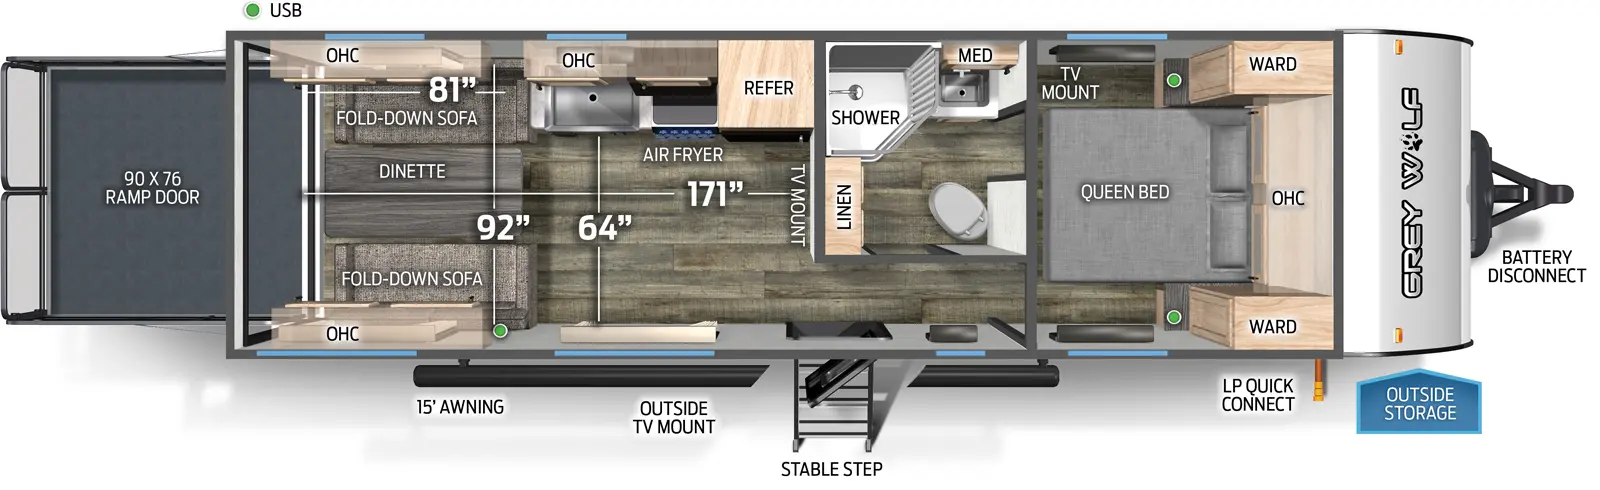 The 25RRT has no slide outs, a rear ramp door, and one entry door. Exterior features include 15 foot awning, outside TV mount, mid stable step entry, LP quick connect, outside storage, and battery disconnect. Interior layout front to back: queen bed with overhead cabinet, wardrobes on either side, and TV mount; off-door side aisle pass through full bathroom with linen closet and medicine cabinet; off-door side refrigerator, air fryer, overhead cabinets, and kitchen countertop with sink; rear opposing wall fold down sofas with overhead cabinets, and dinette table. Cargo area measurements: 171 inches from the rear of the trailer to the bathroom wall; 64 inches from the kitchen countertop to the door side wall; 92 inches from off-door side wall to door side wall; 81 inches from rear of trailer to the kitchen countertop; 90 inch by 76 inch rear ramp door.